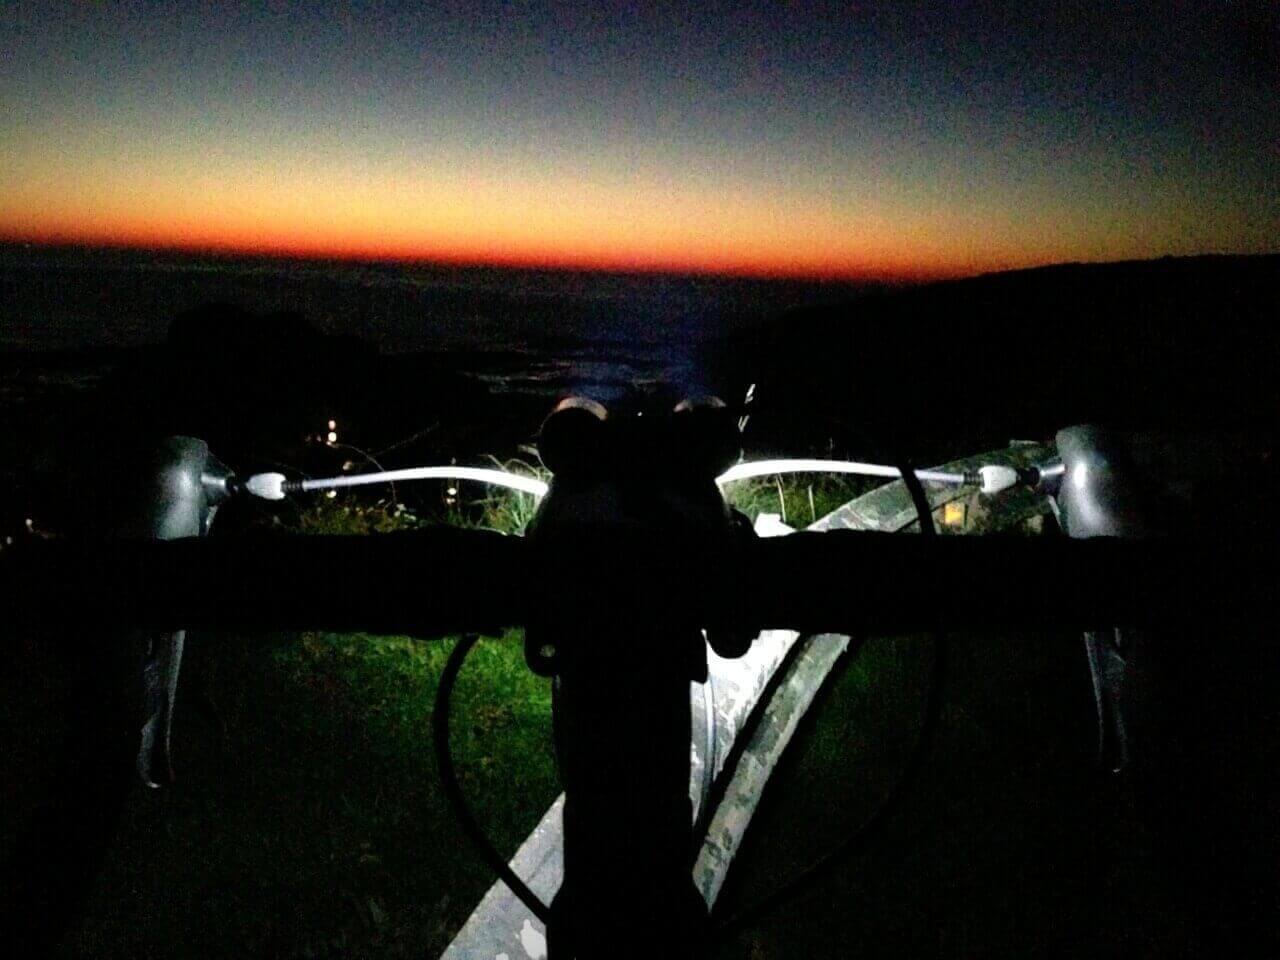 Cycling at night in Jersey